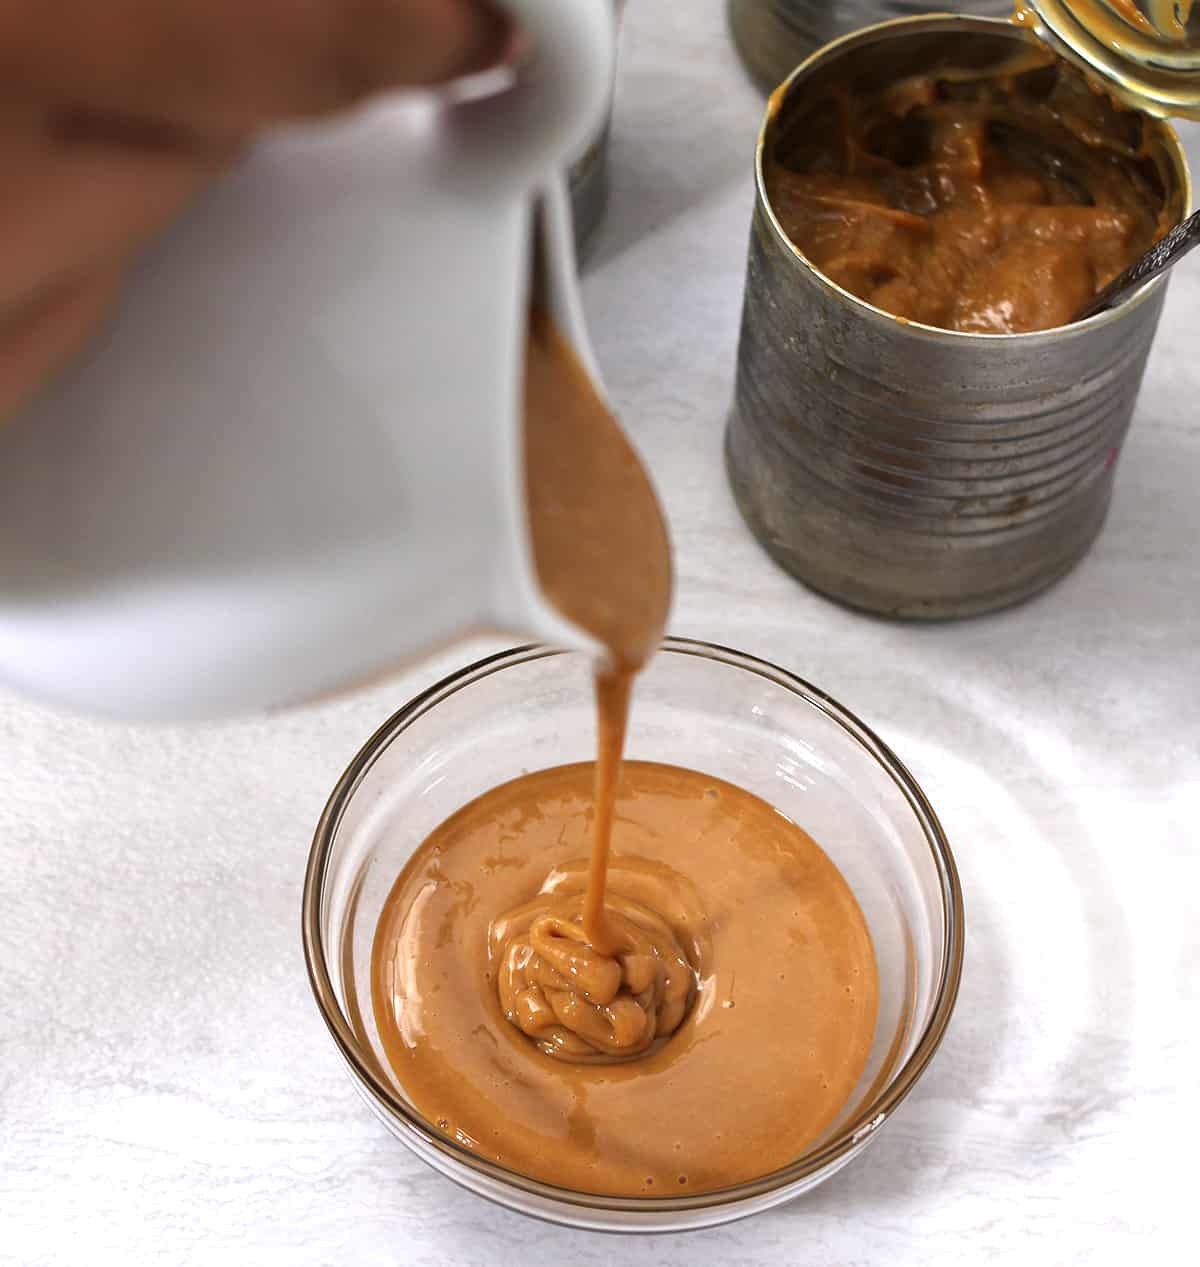 Showing the perfect, thick consistency and copper or golden brown color of homemade dulce de leche. 